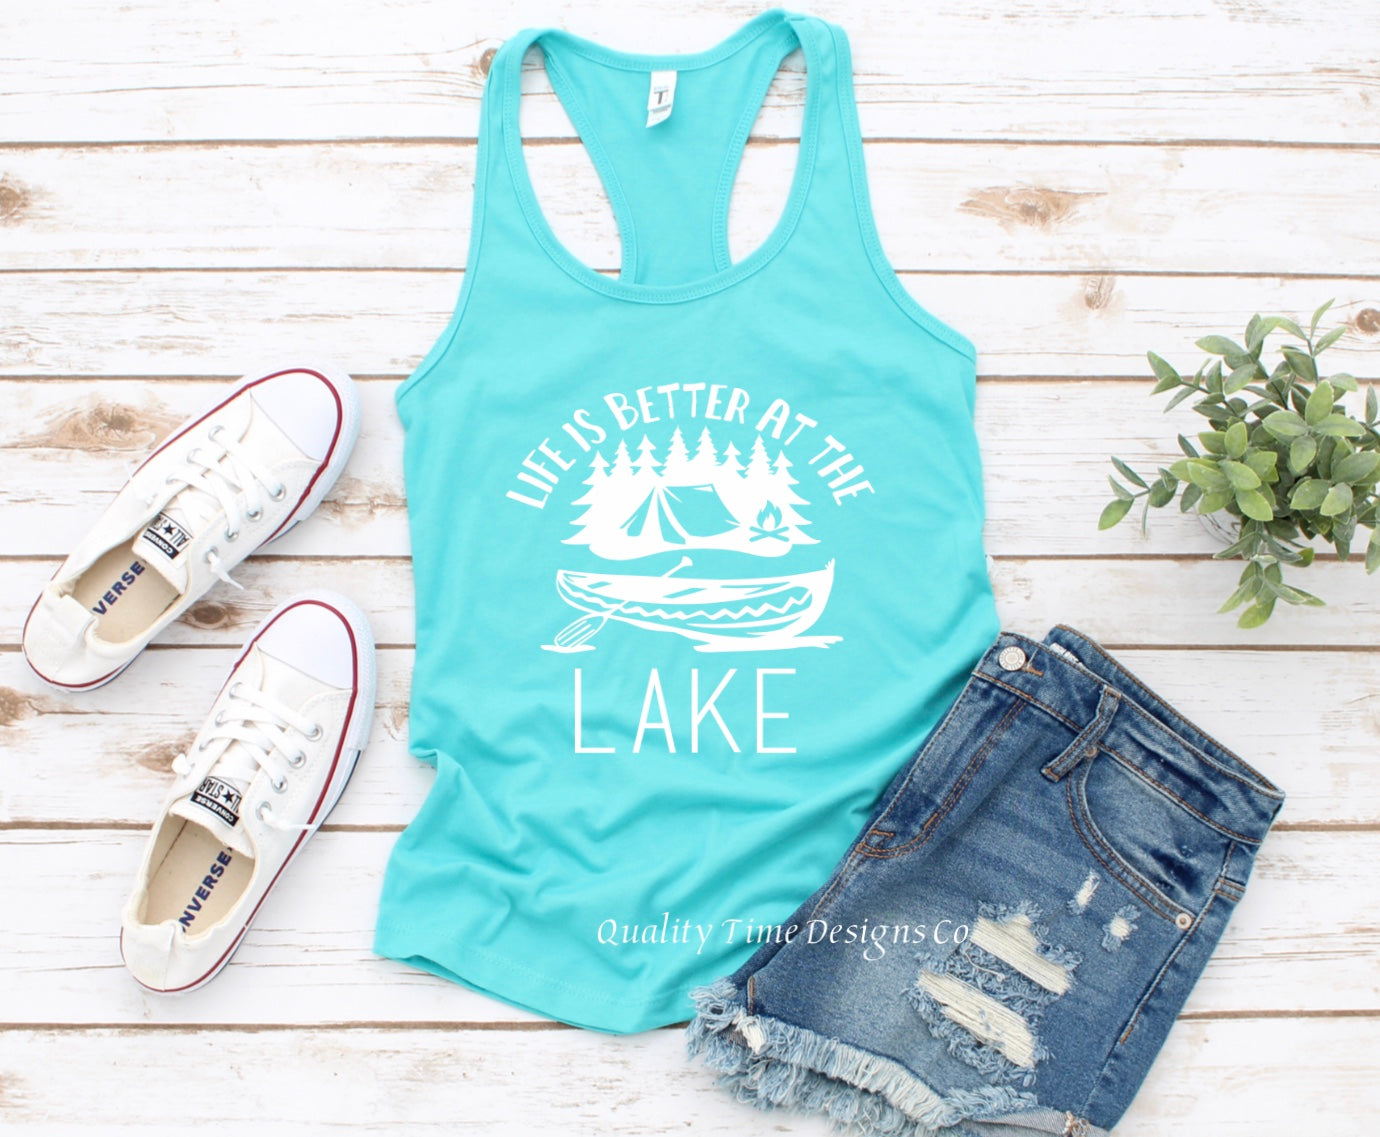 Life is better at the lake racer back tank top 